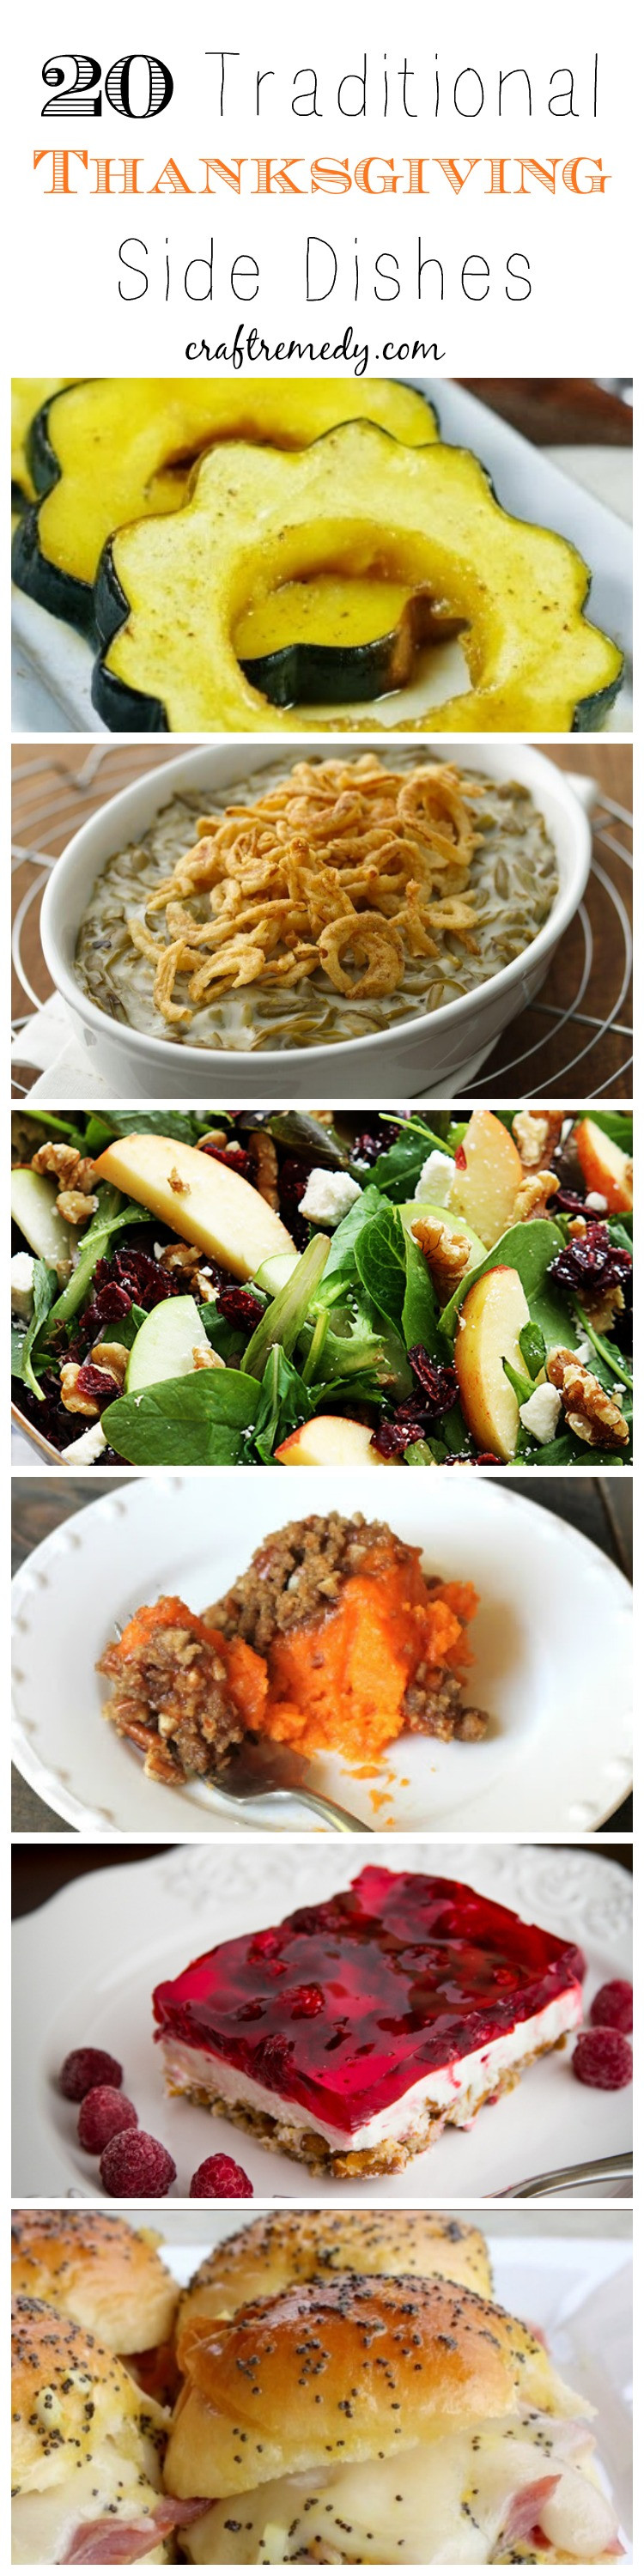 Great Thanksgiving Side Dishes
 20 of the Best Thanksgiving Side Dishes Craft Remedy